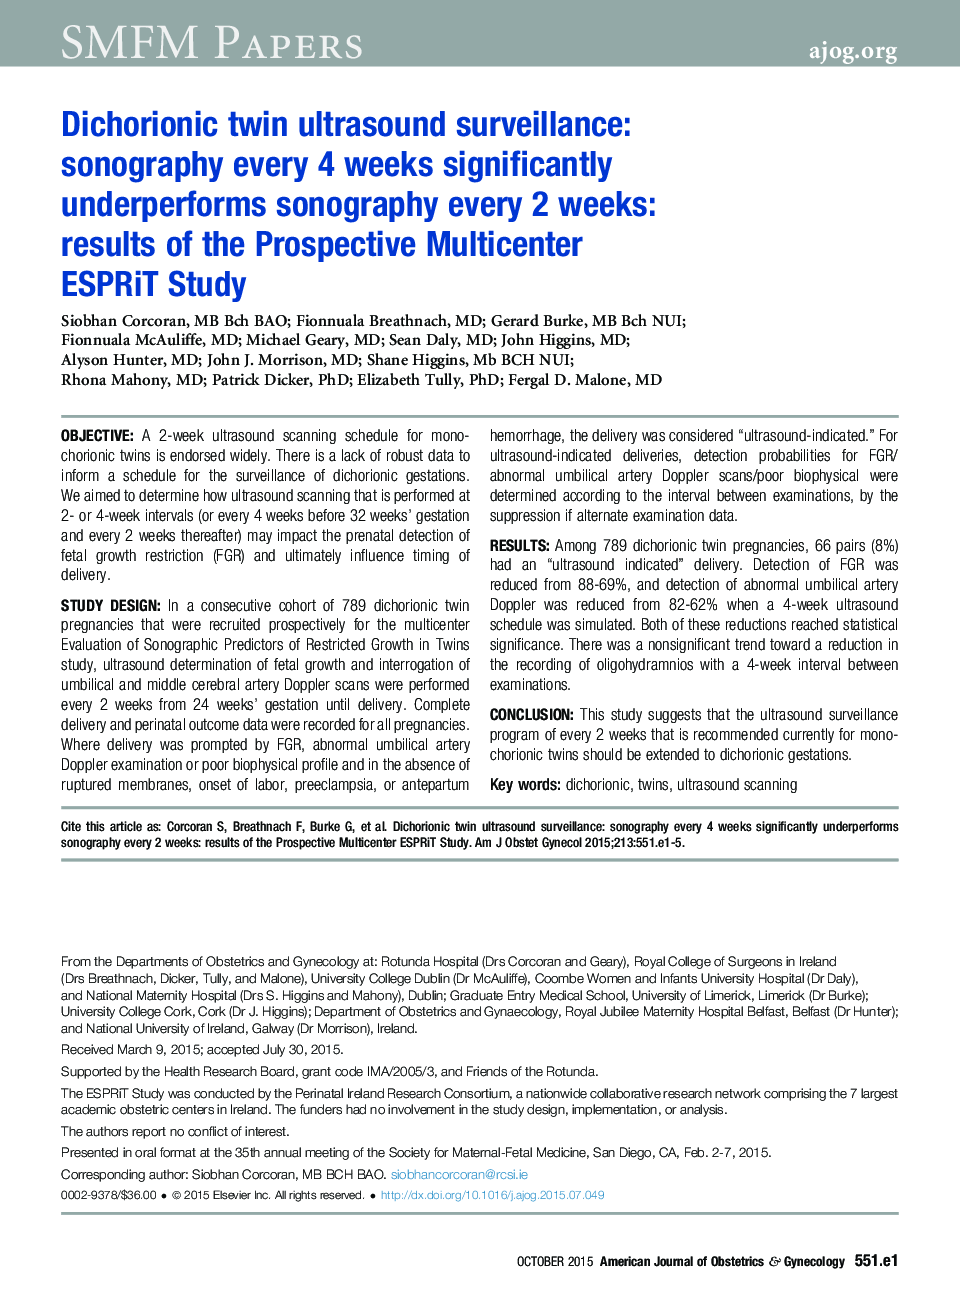 Dichorionic twin ultrasound surveillance: sonography every 4 weeks significantly underperforms sonography every 2 weeks: results of the Prospective Multicenter ESPRiTÂ Study